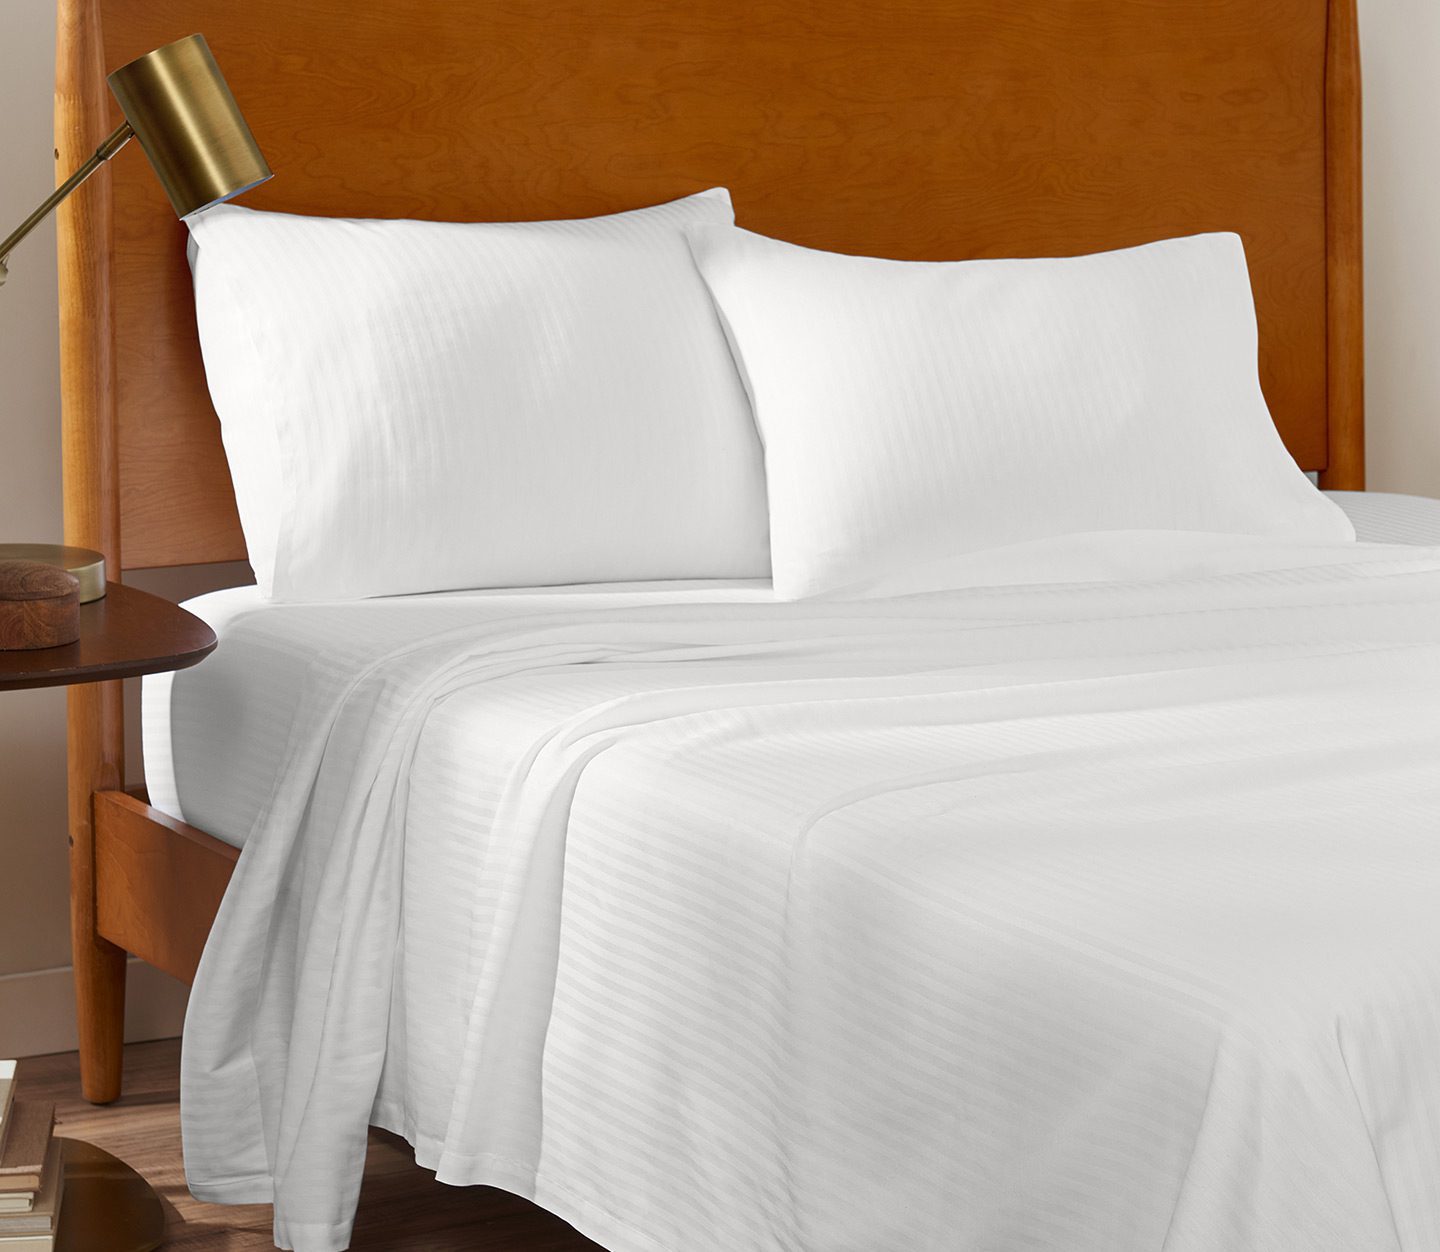 Secrets Behind Washing Hotel Sheets From a the Housekeepers